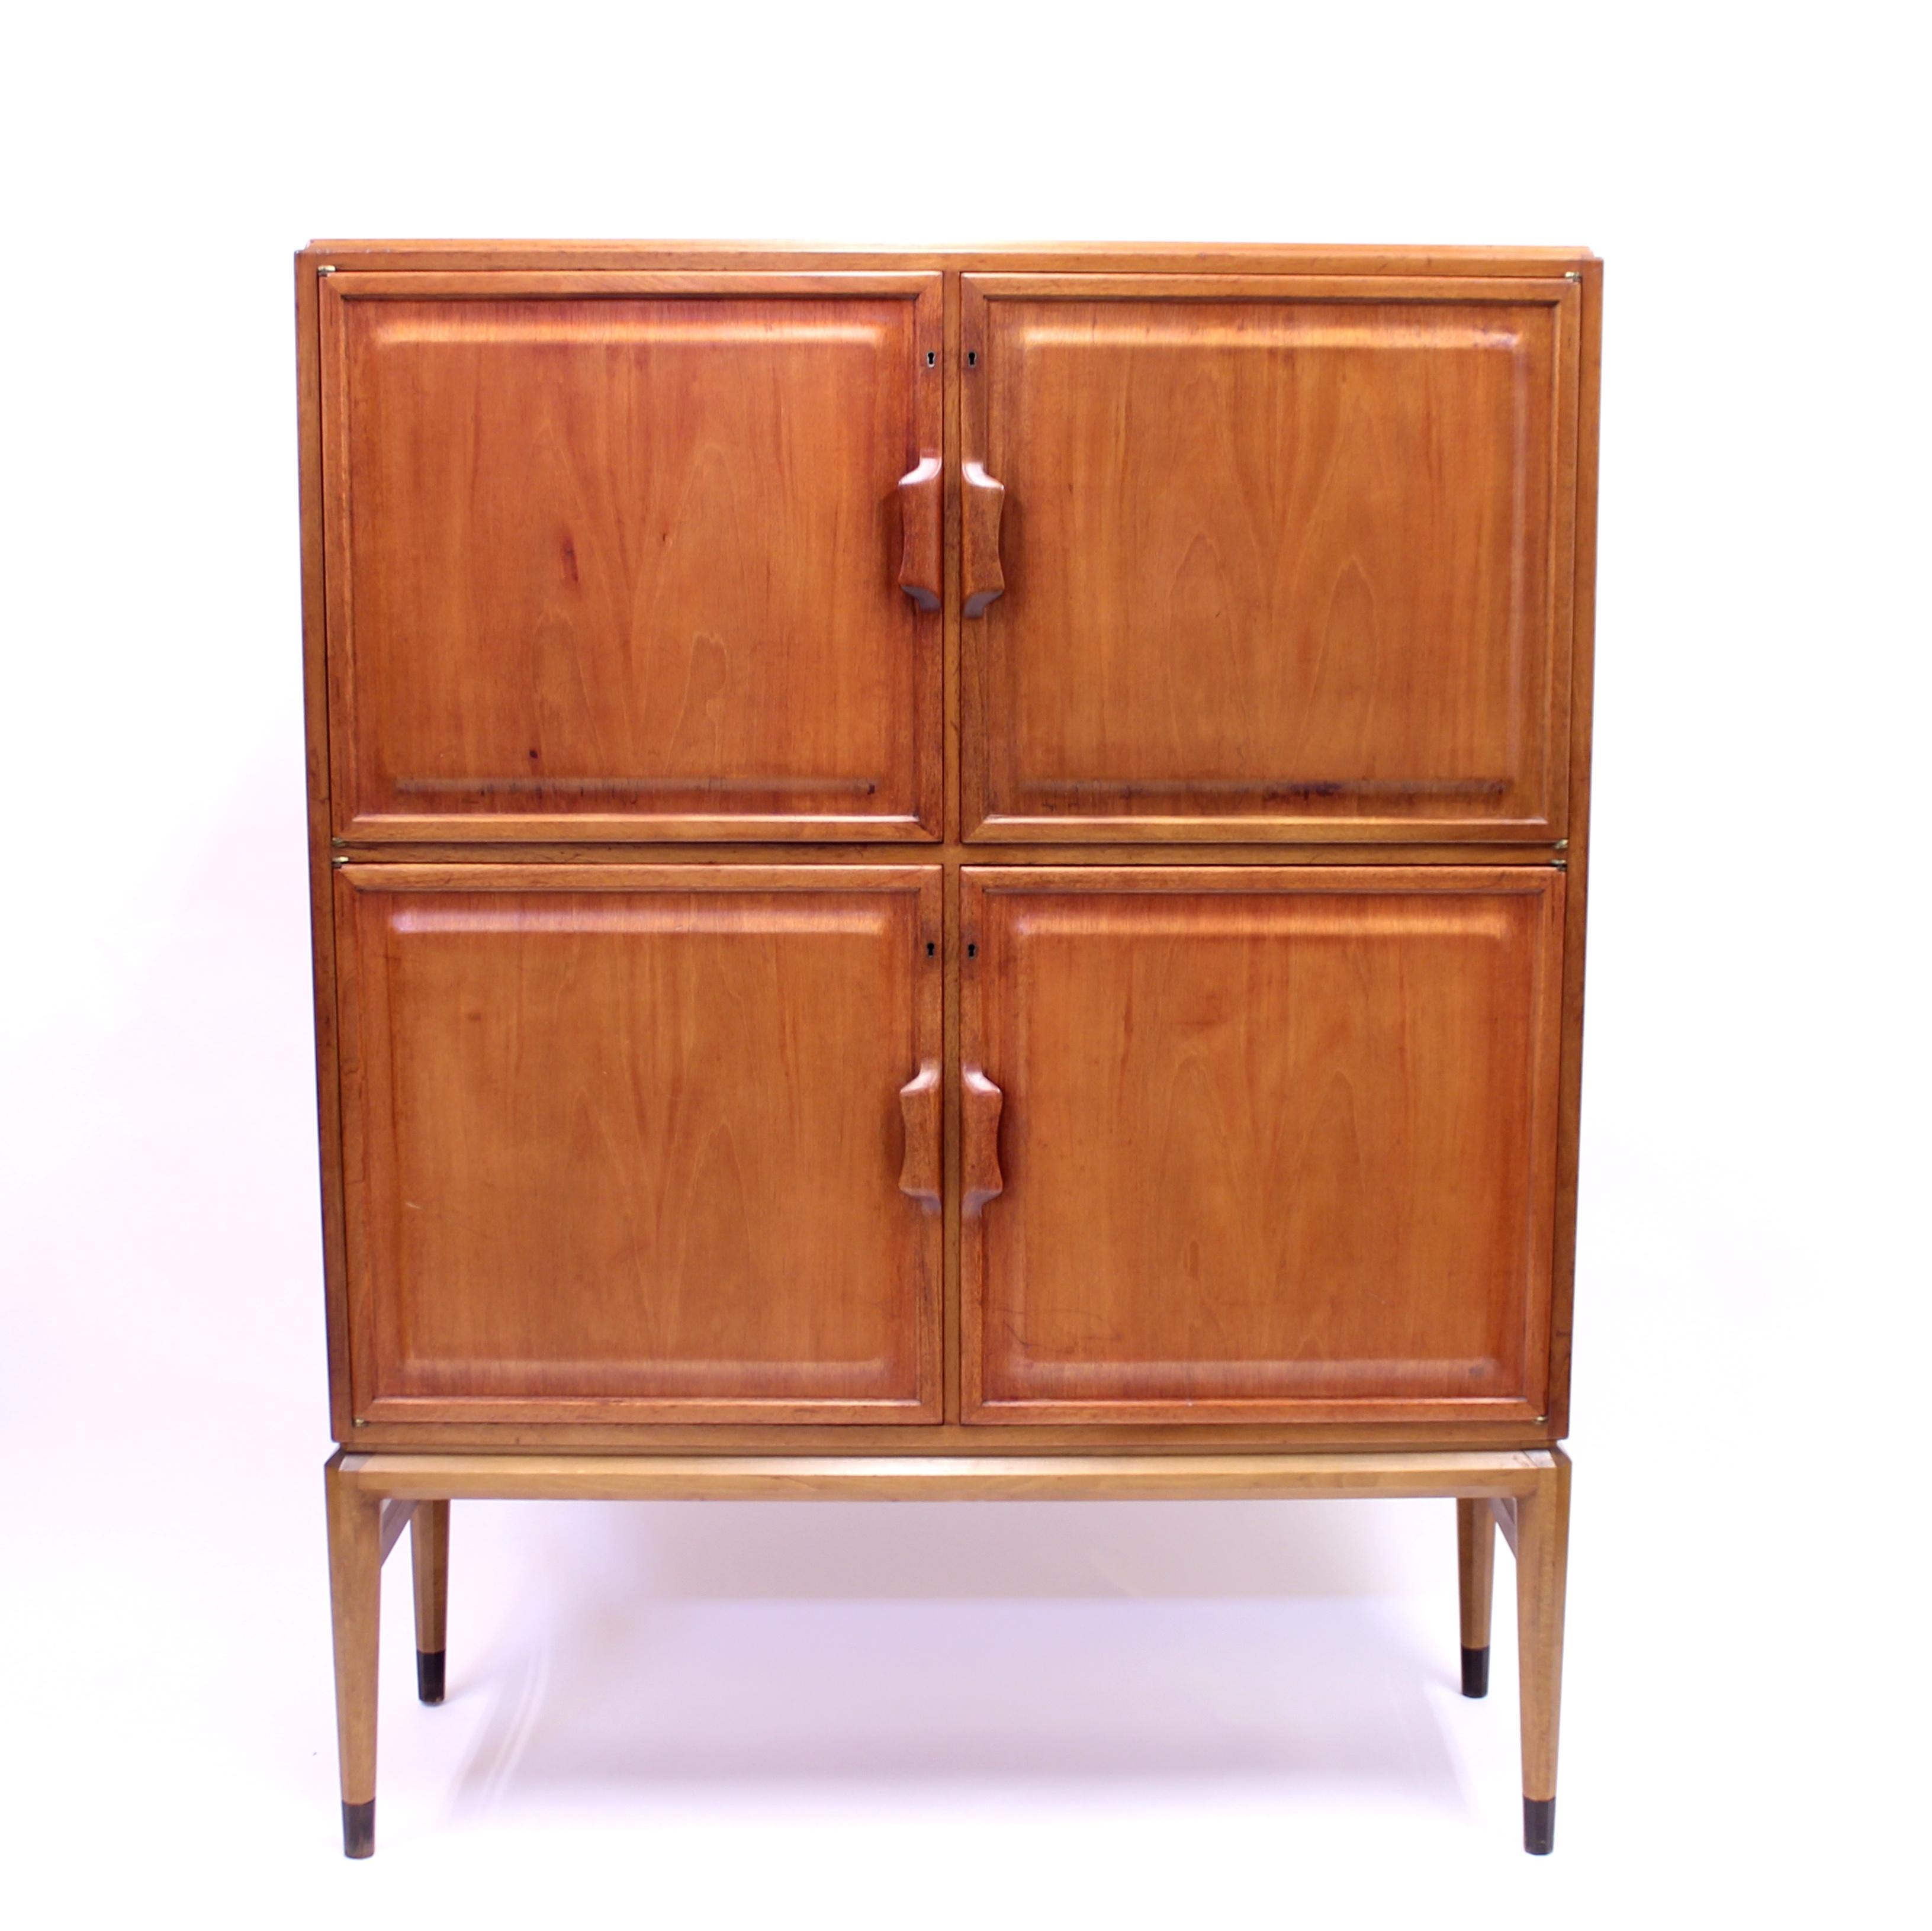 Four door cabinet, model 2910, in mahogany designed in 1949 by Axel Larsson or Bertil Fridhagen for SMF (Svenska Möbelfabrikerna) Bodafors. Both of these designer were working for Bodafors at the time and it is up to this day not really clear who